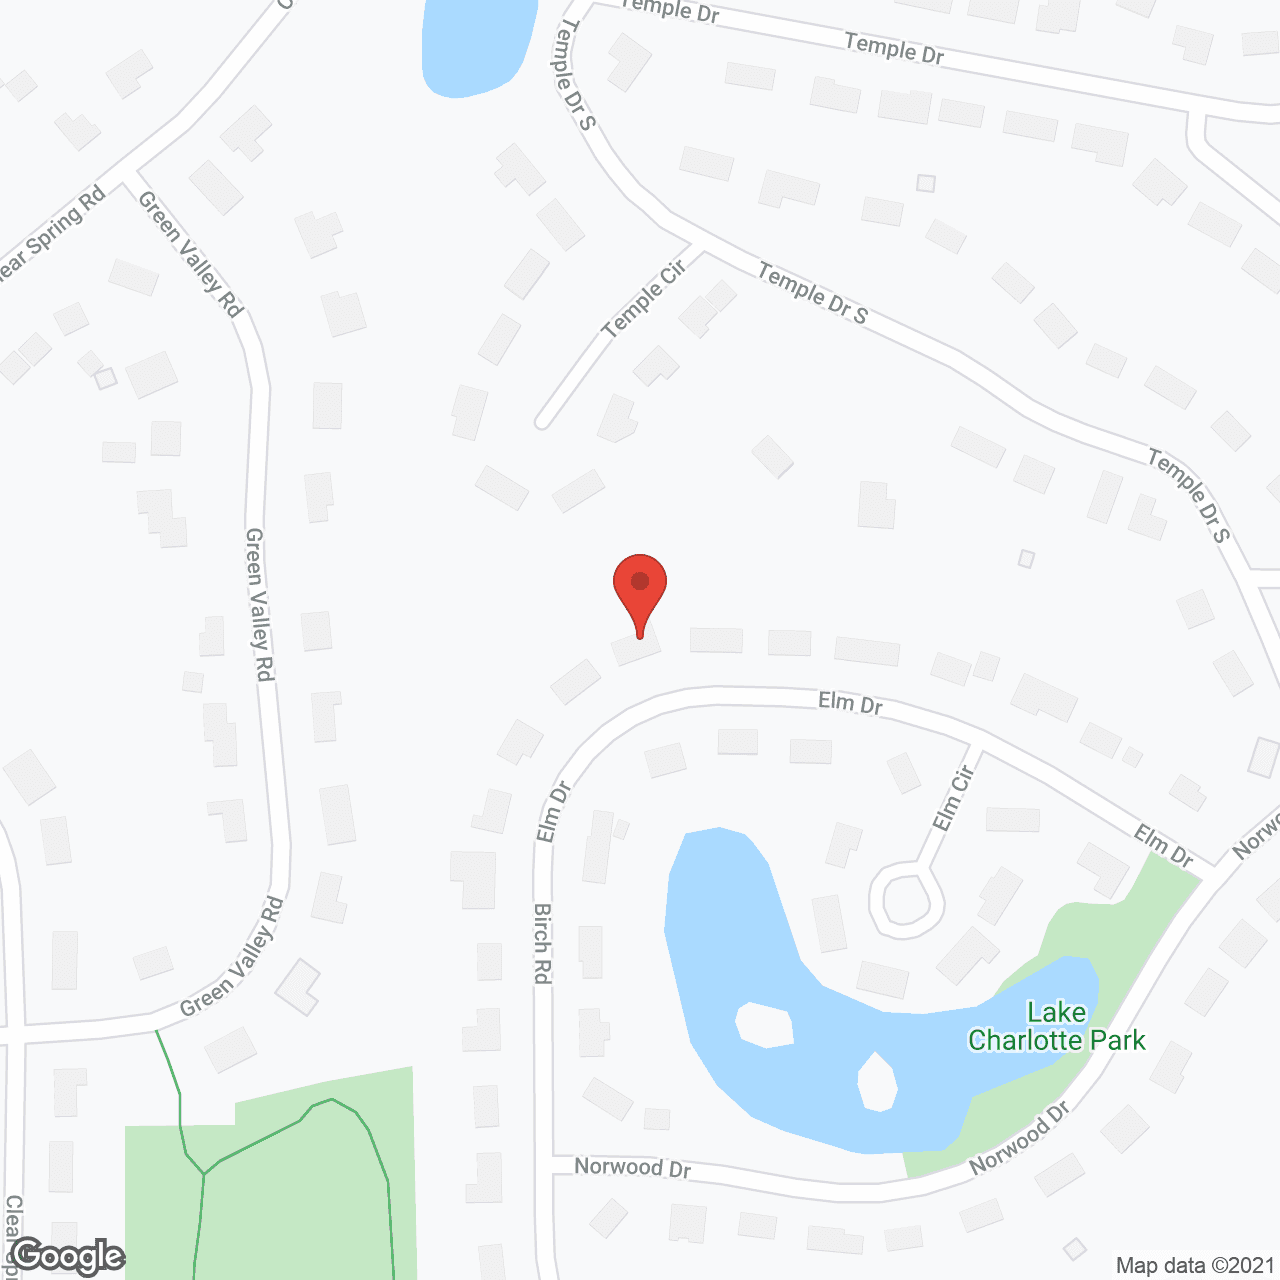 Woodland Hills Residential Care Home in google map